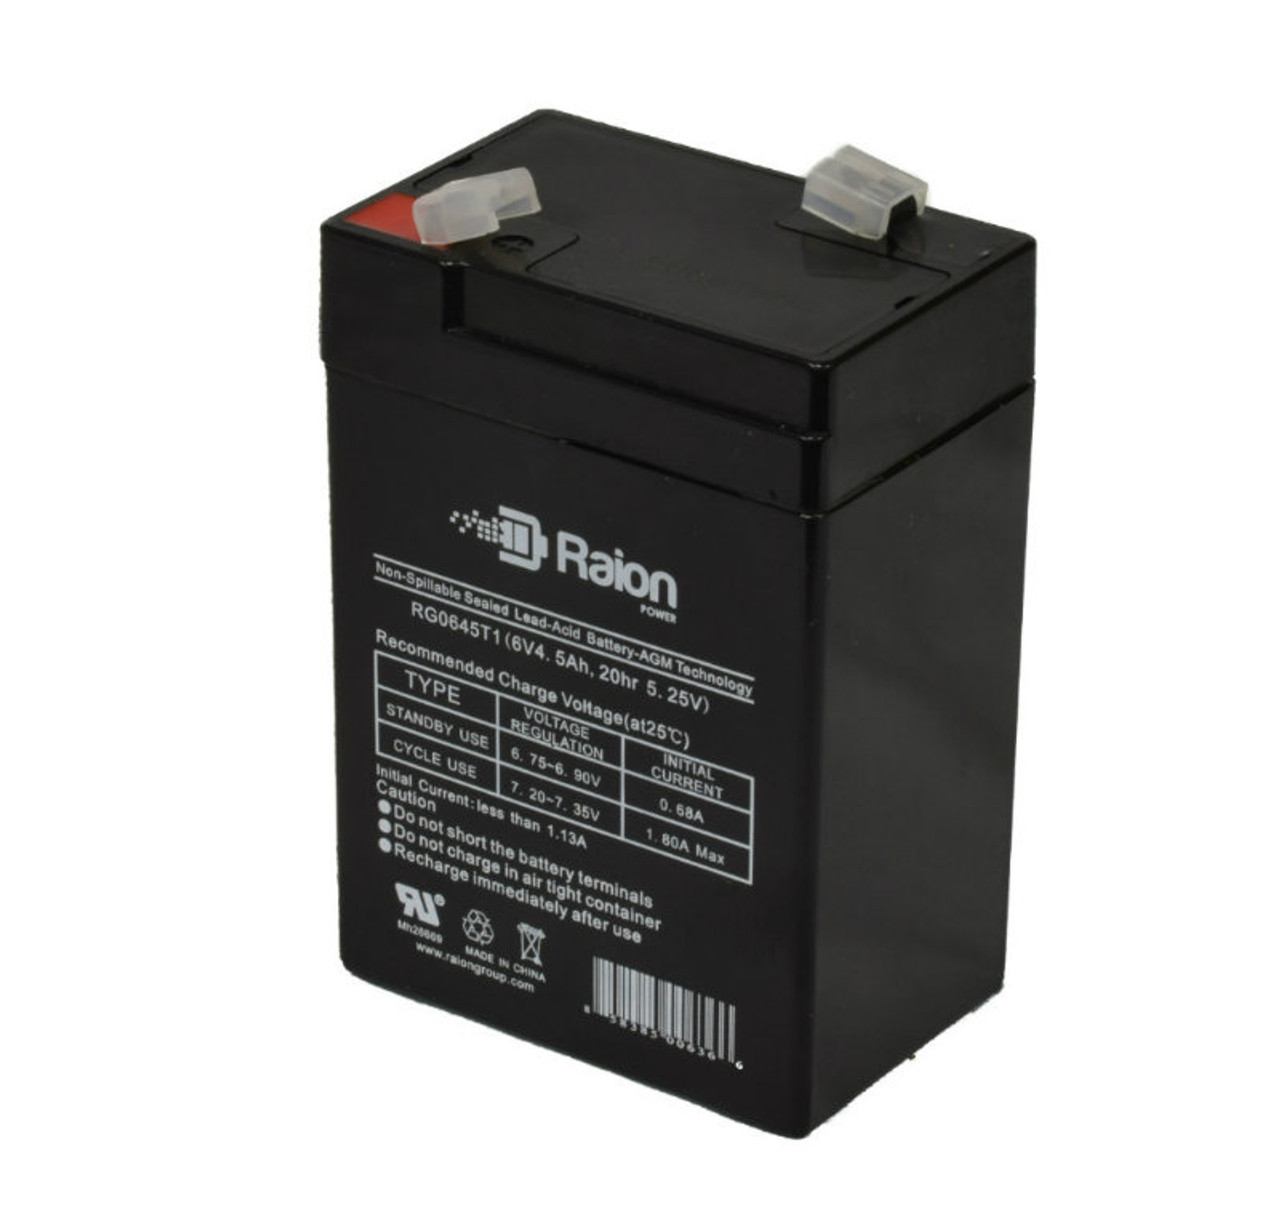 Raion Power RG0645T1 6V 4.5Ah Replacement Battery Cartridge for ELS ELS EDS640F